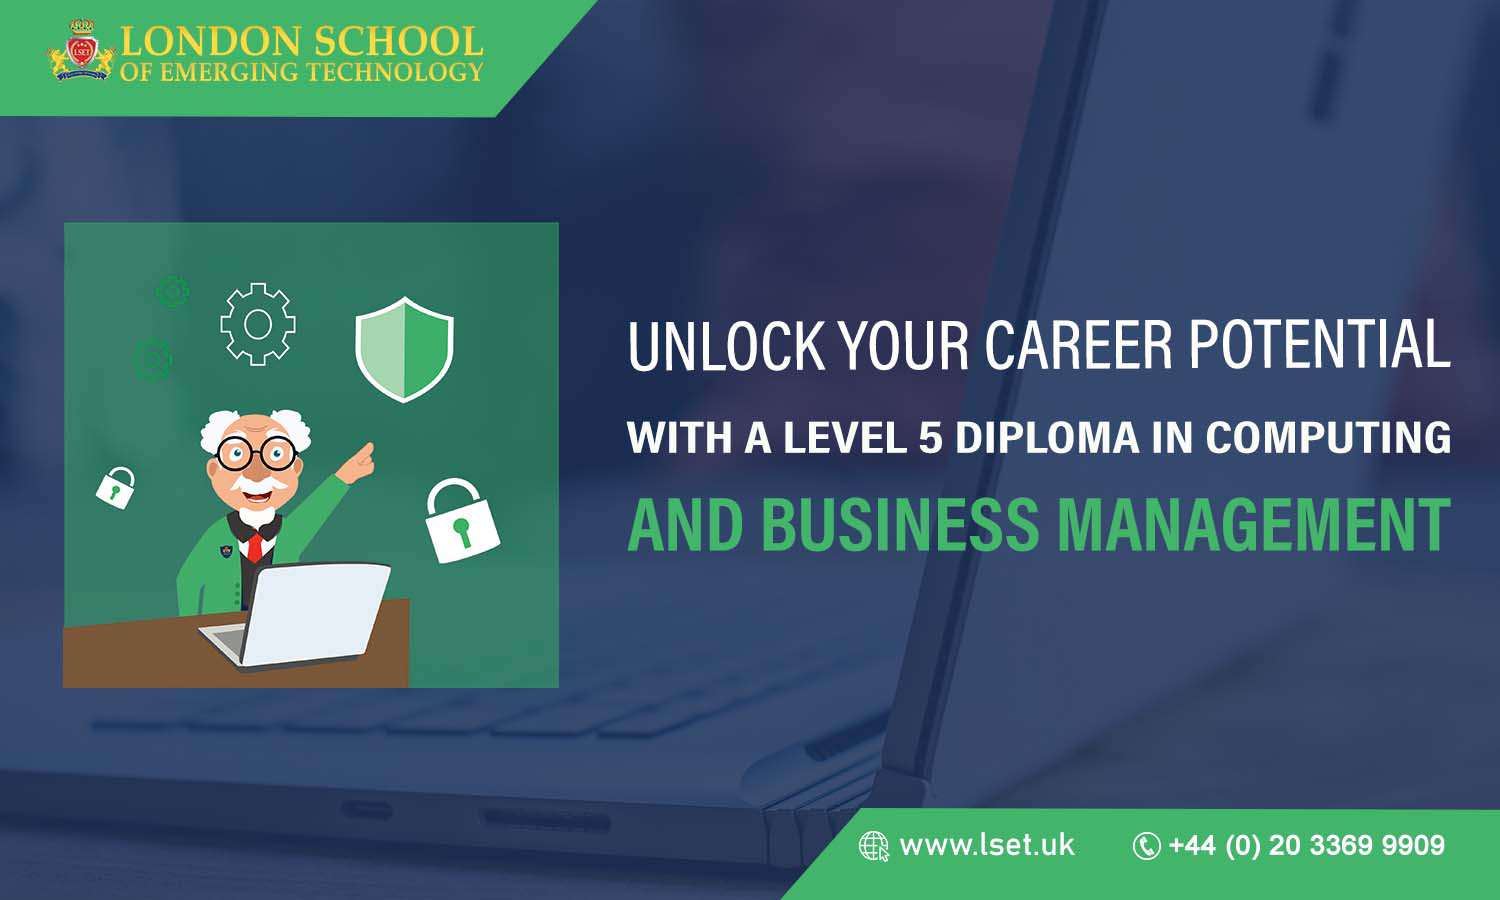 Unlock Your Career Potential with a Level 5 Diploma in Computing and Business Management